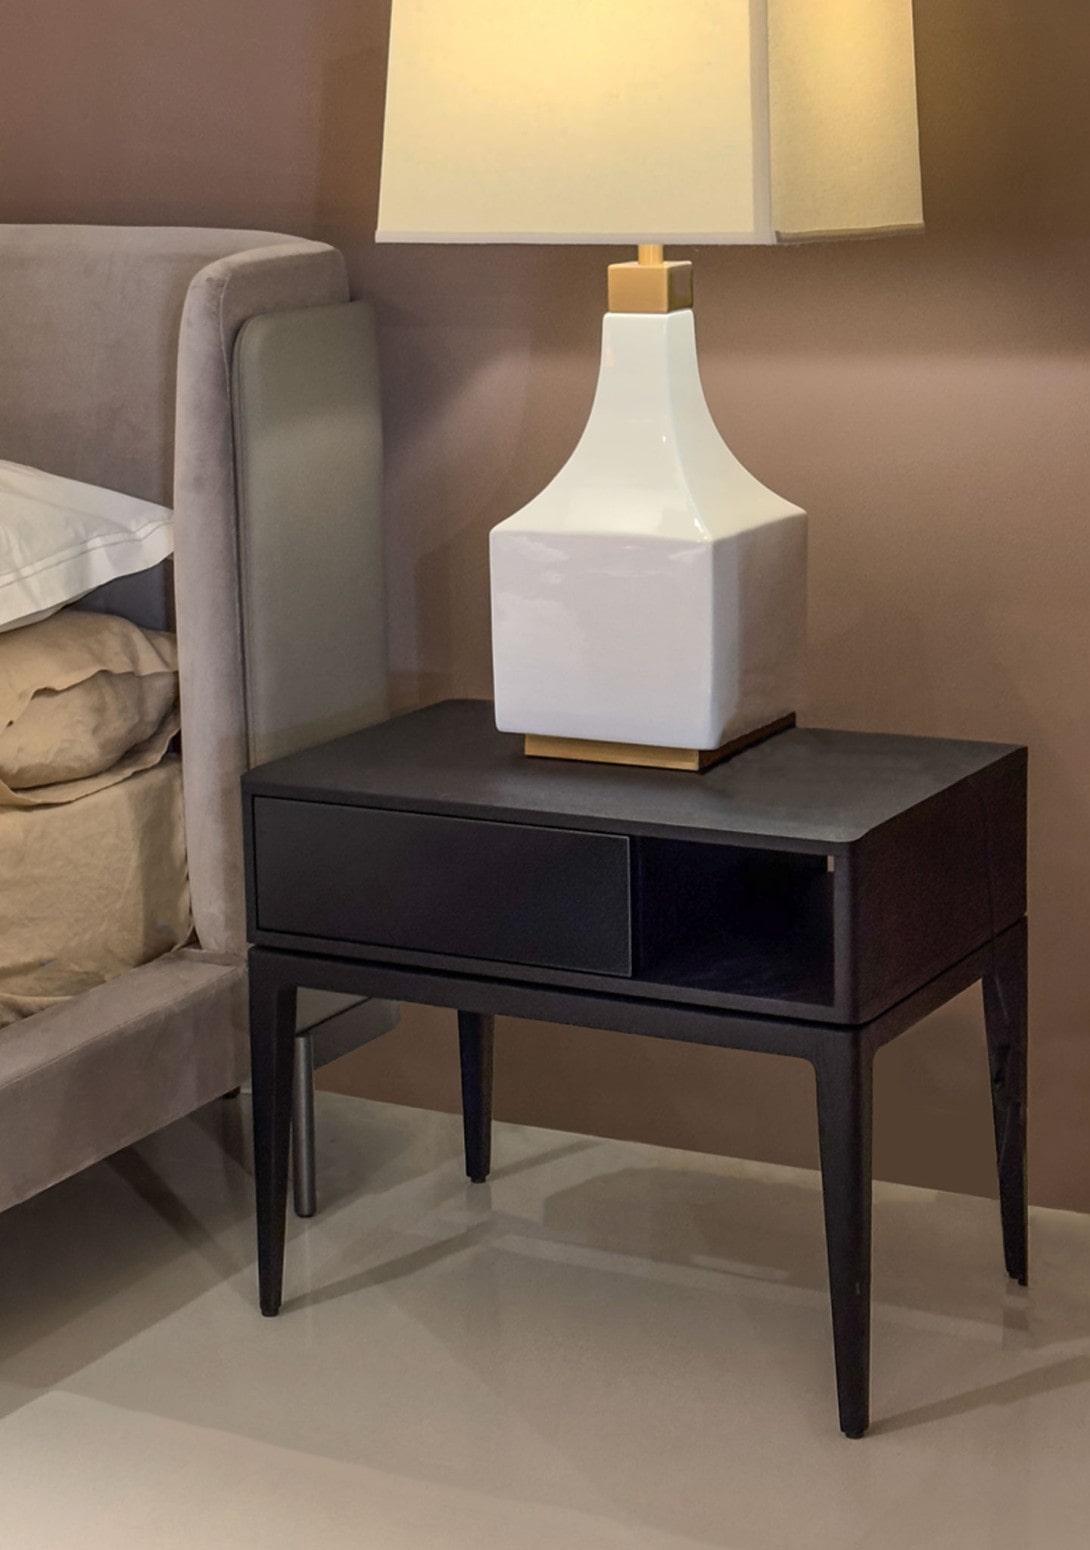 HC28 Pian Pian Bedside Table in Black Laquer DOMO